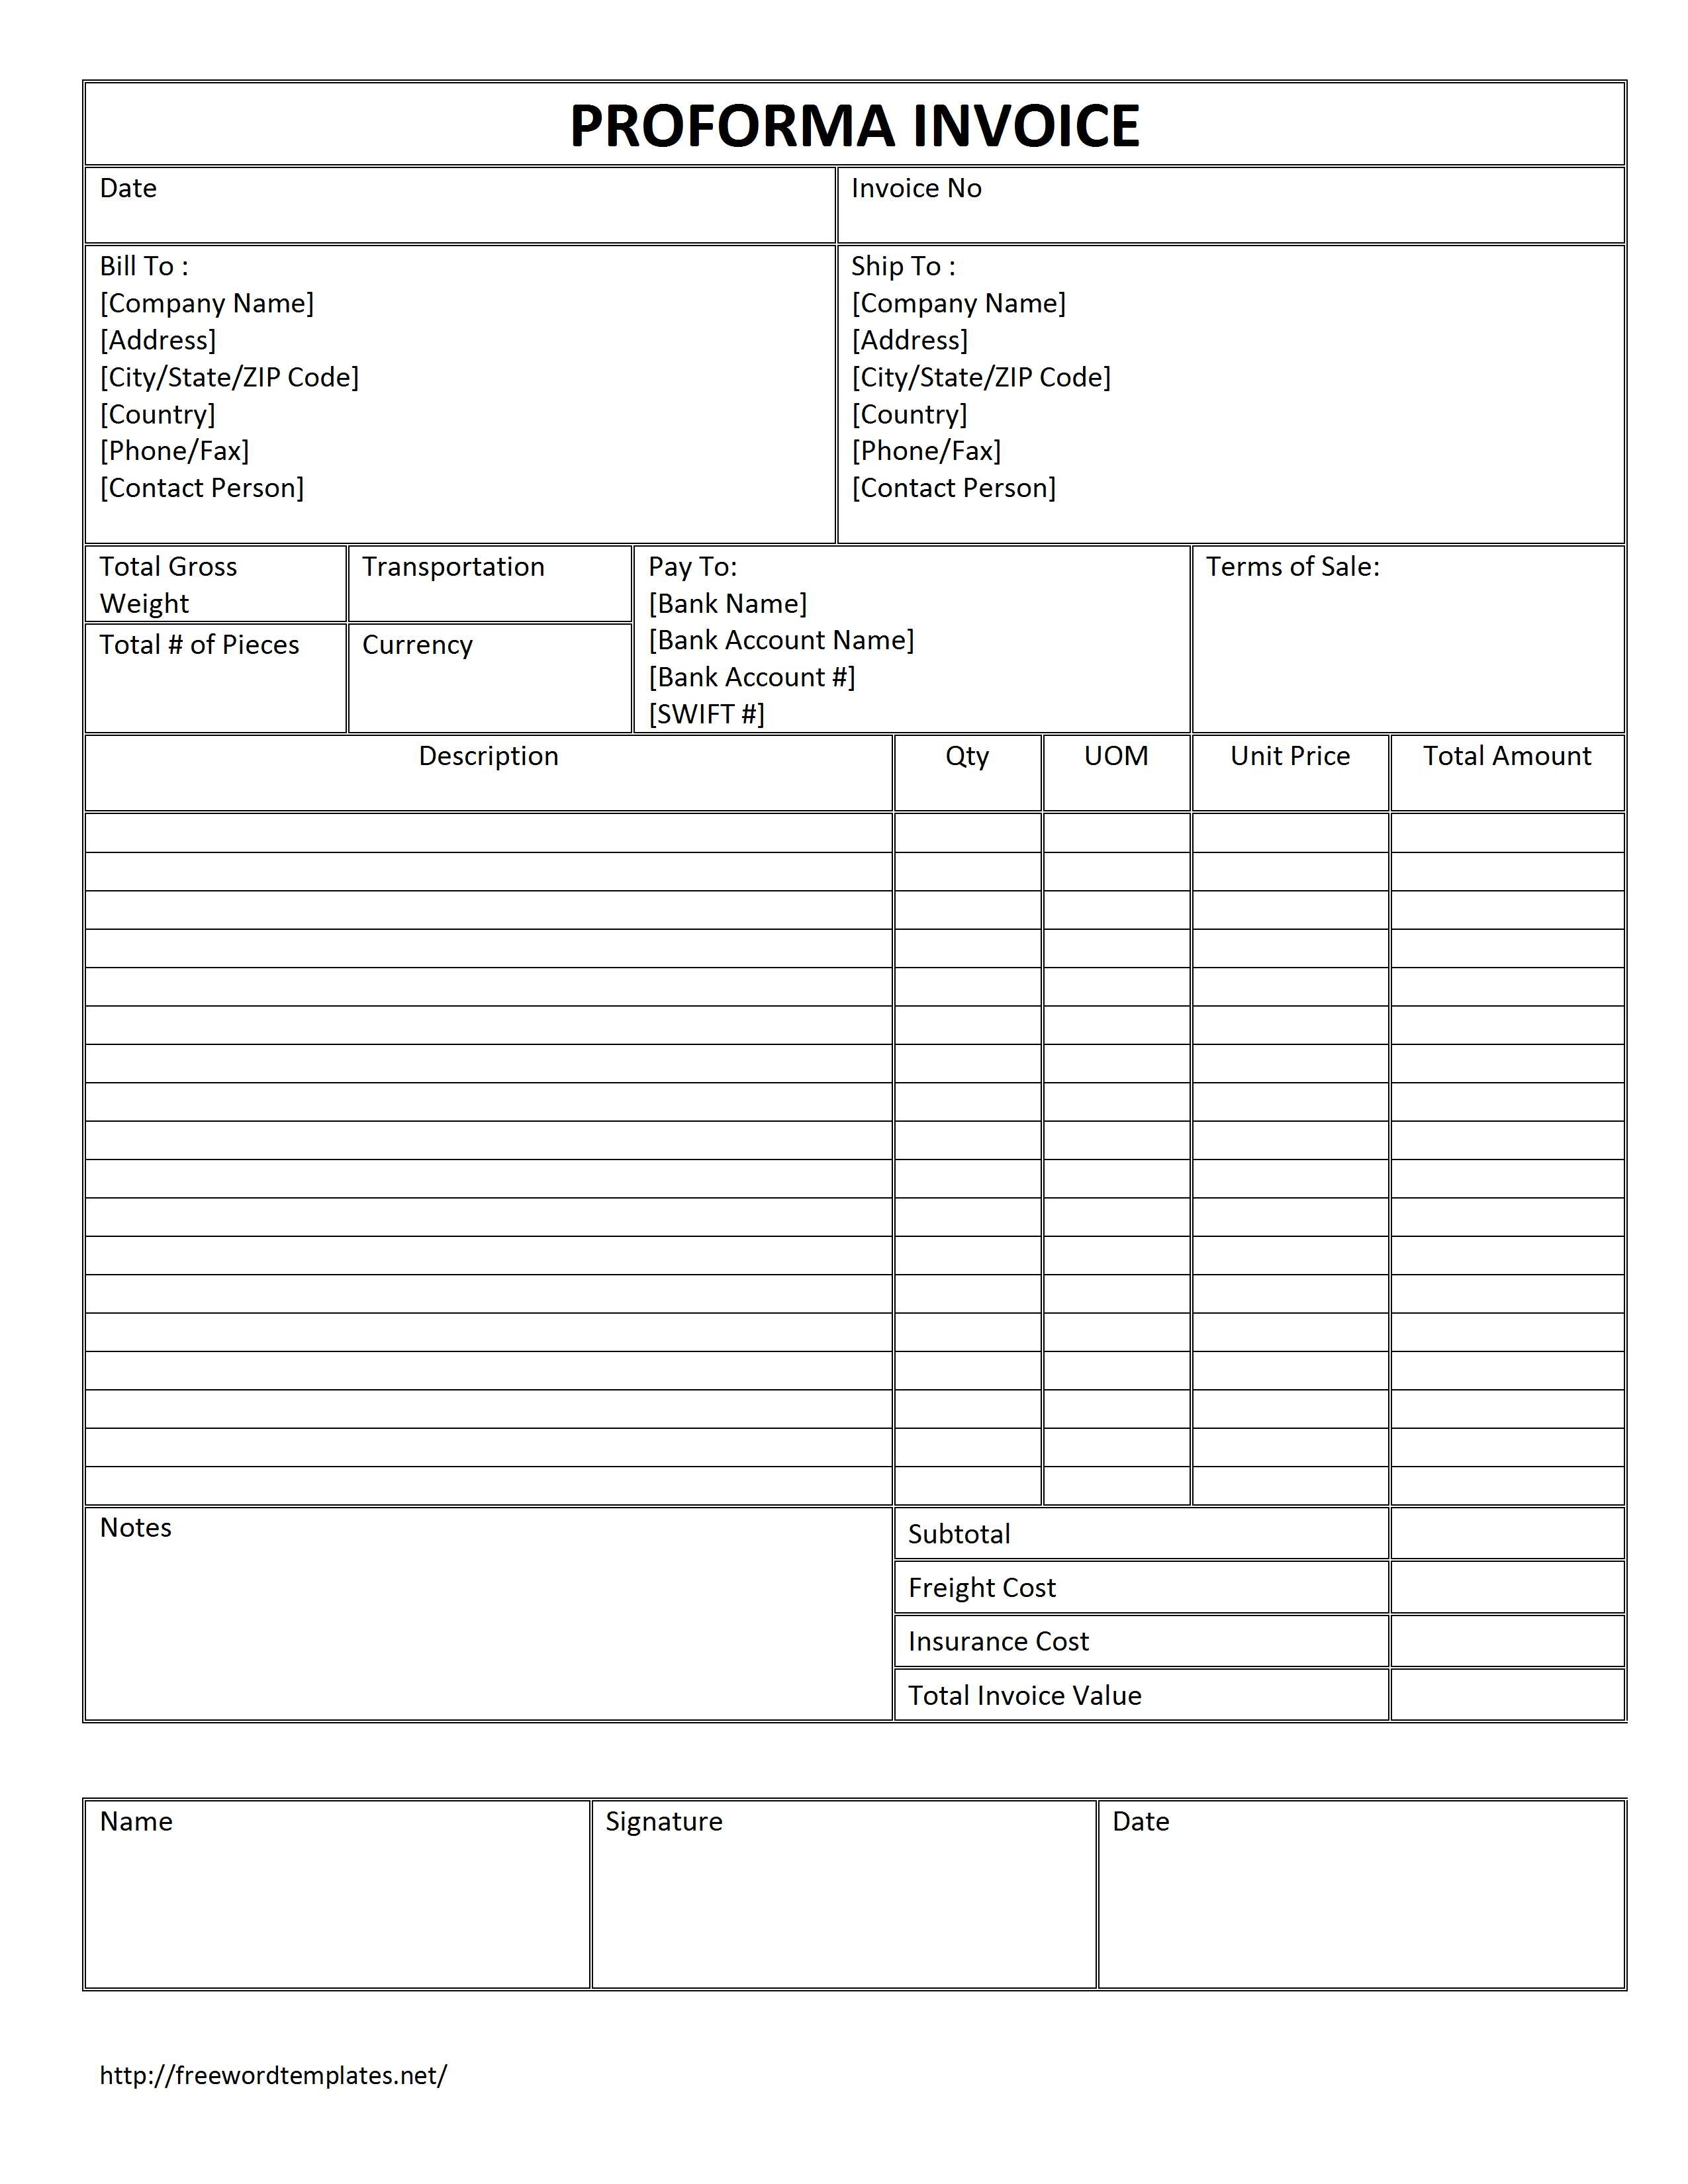 proforma invoice format for advance payment proforma invoice for advance payment invoice template ideas 2550 X 3300